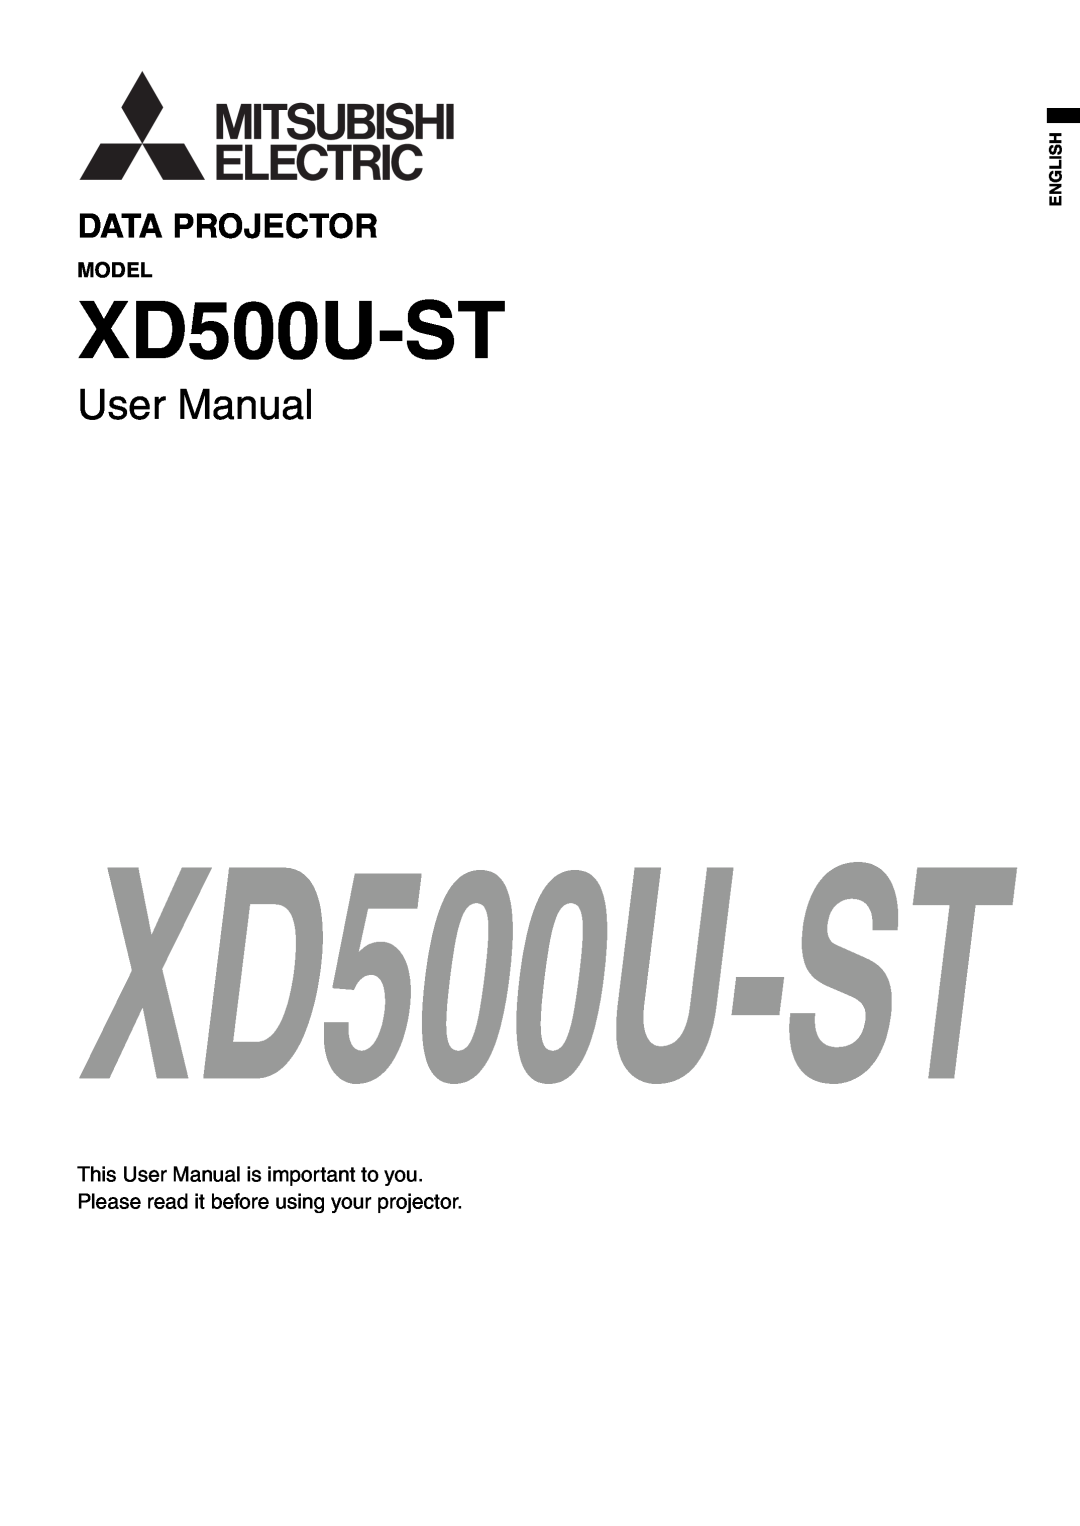 Mitsubishi Electronics XD500U-ST, SD510U manual Interface, Control command diagram, PC-controllable functions, Connection 